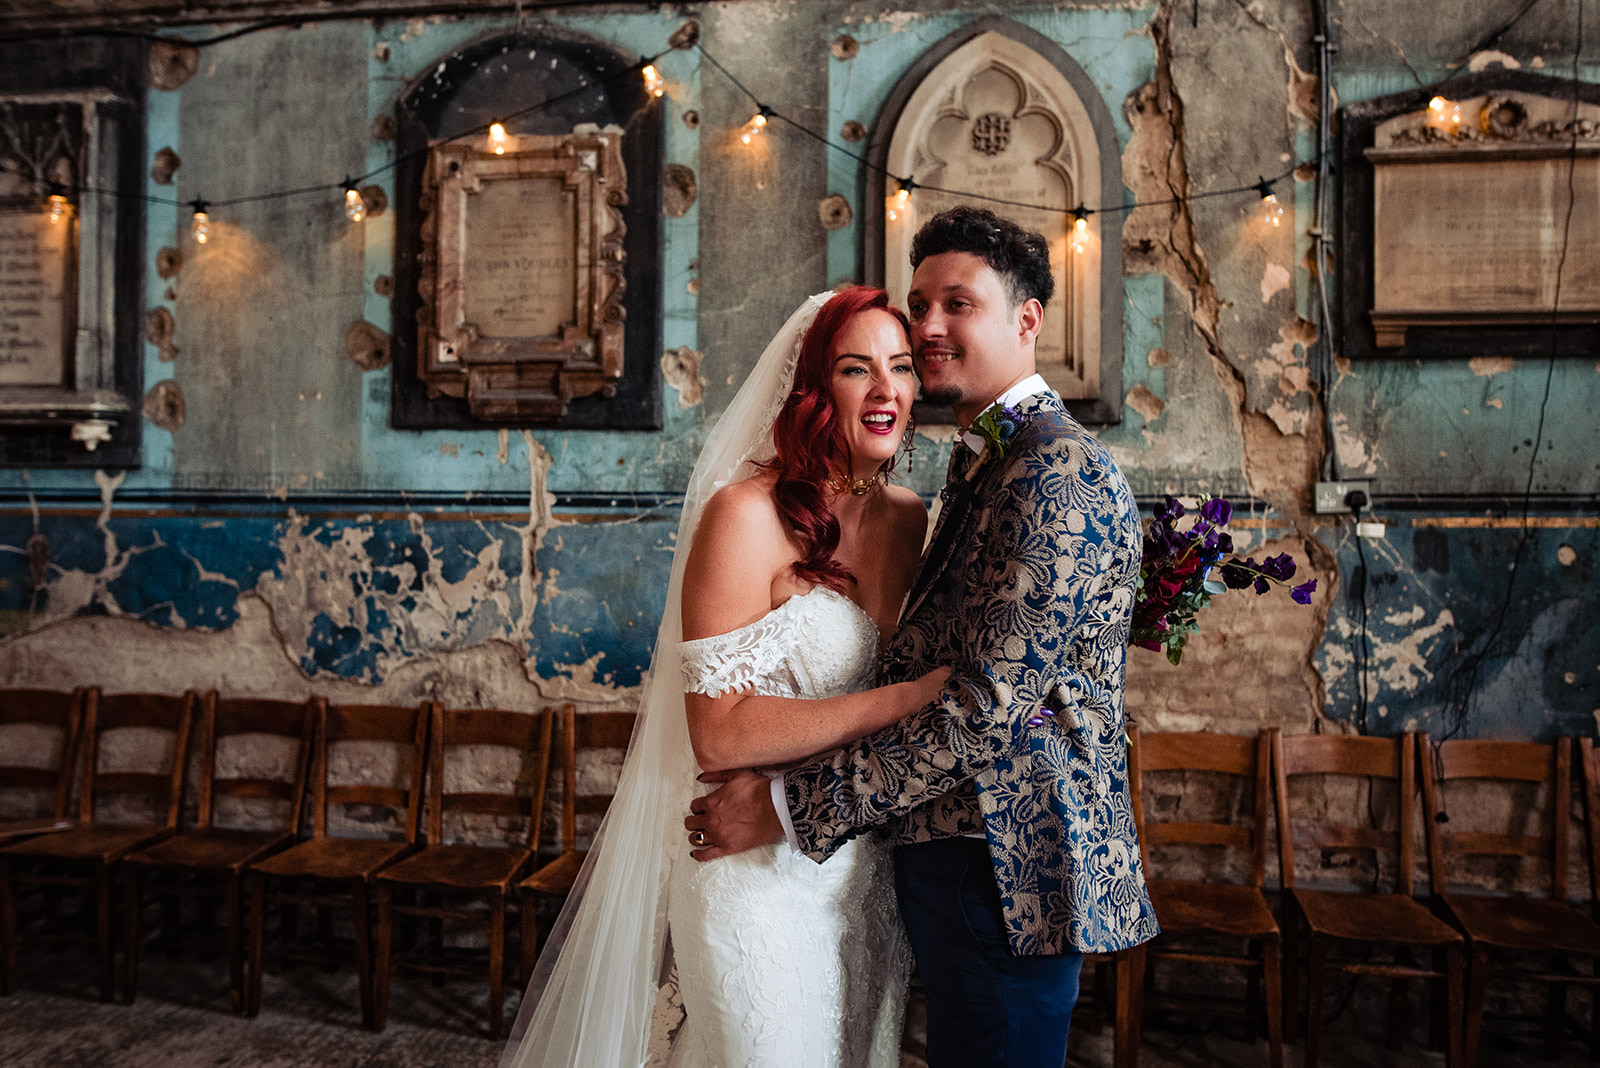 lovely portrait of the wedding couple at the Asylum Chapel in Peckham